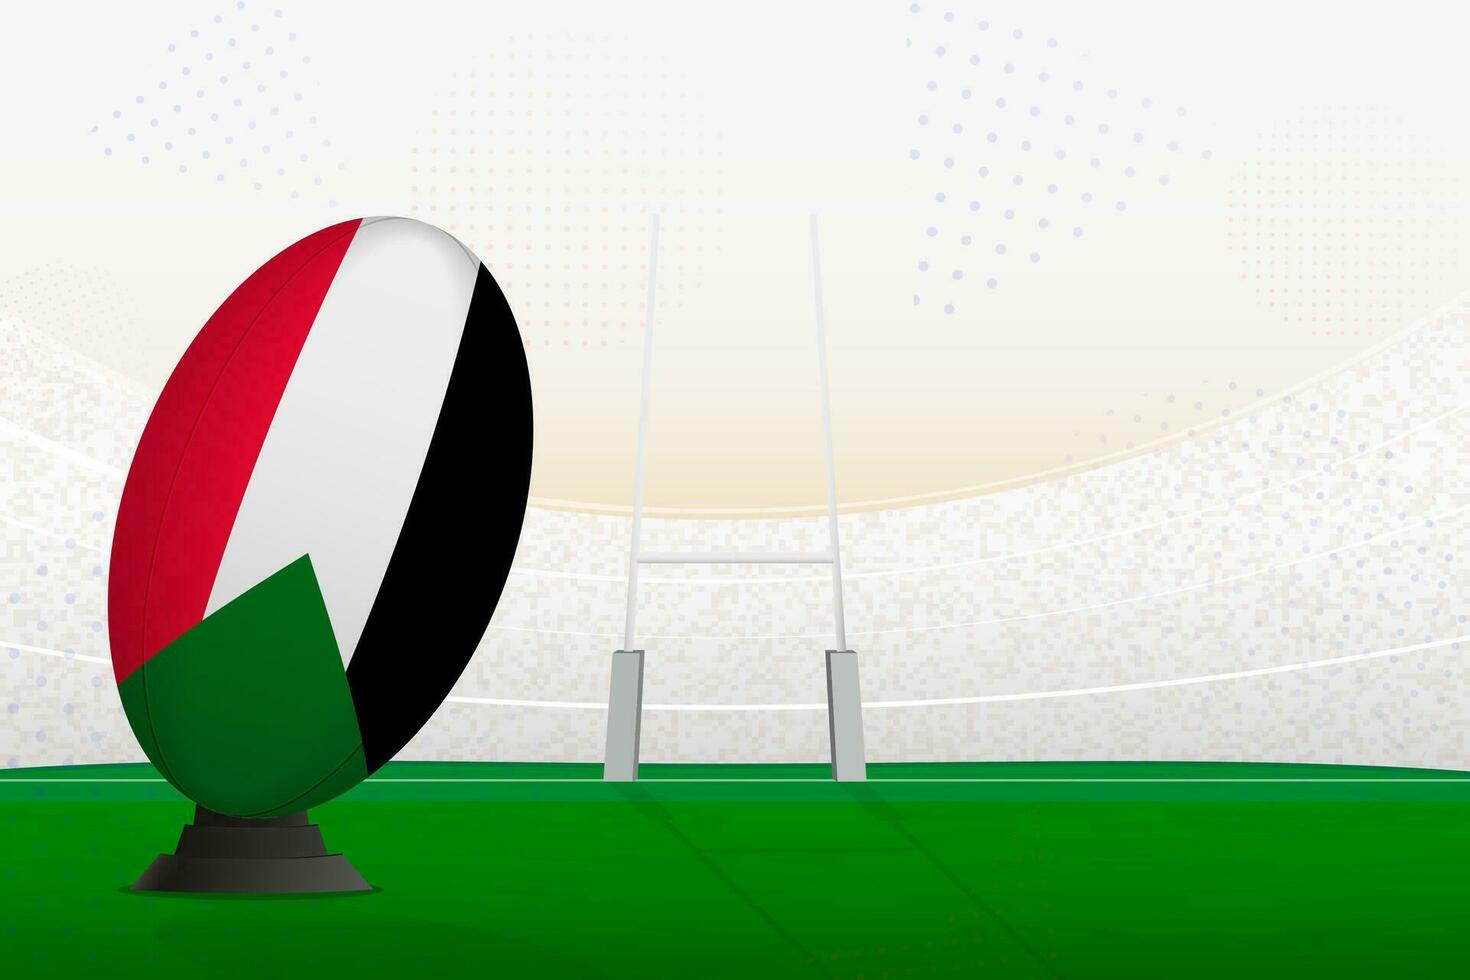 Sudan national team rugby ball on rugby stadium and goal posts, preparing for a penalty or free kick. vector